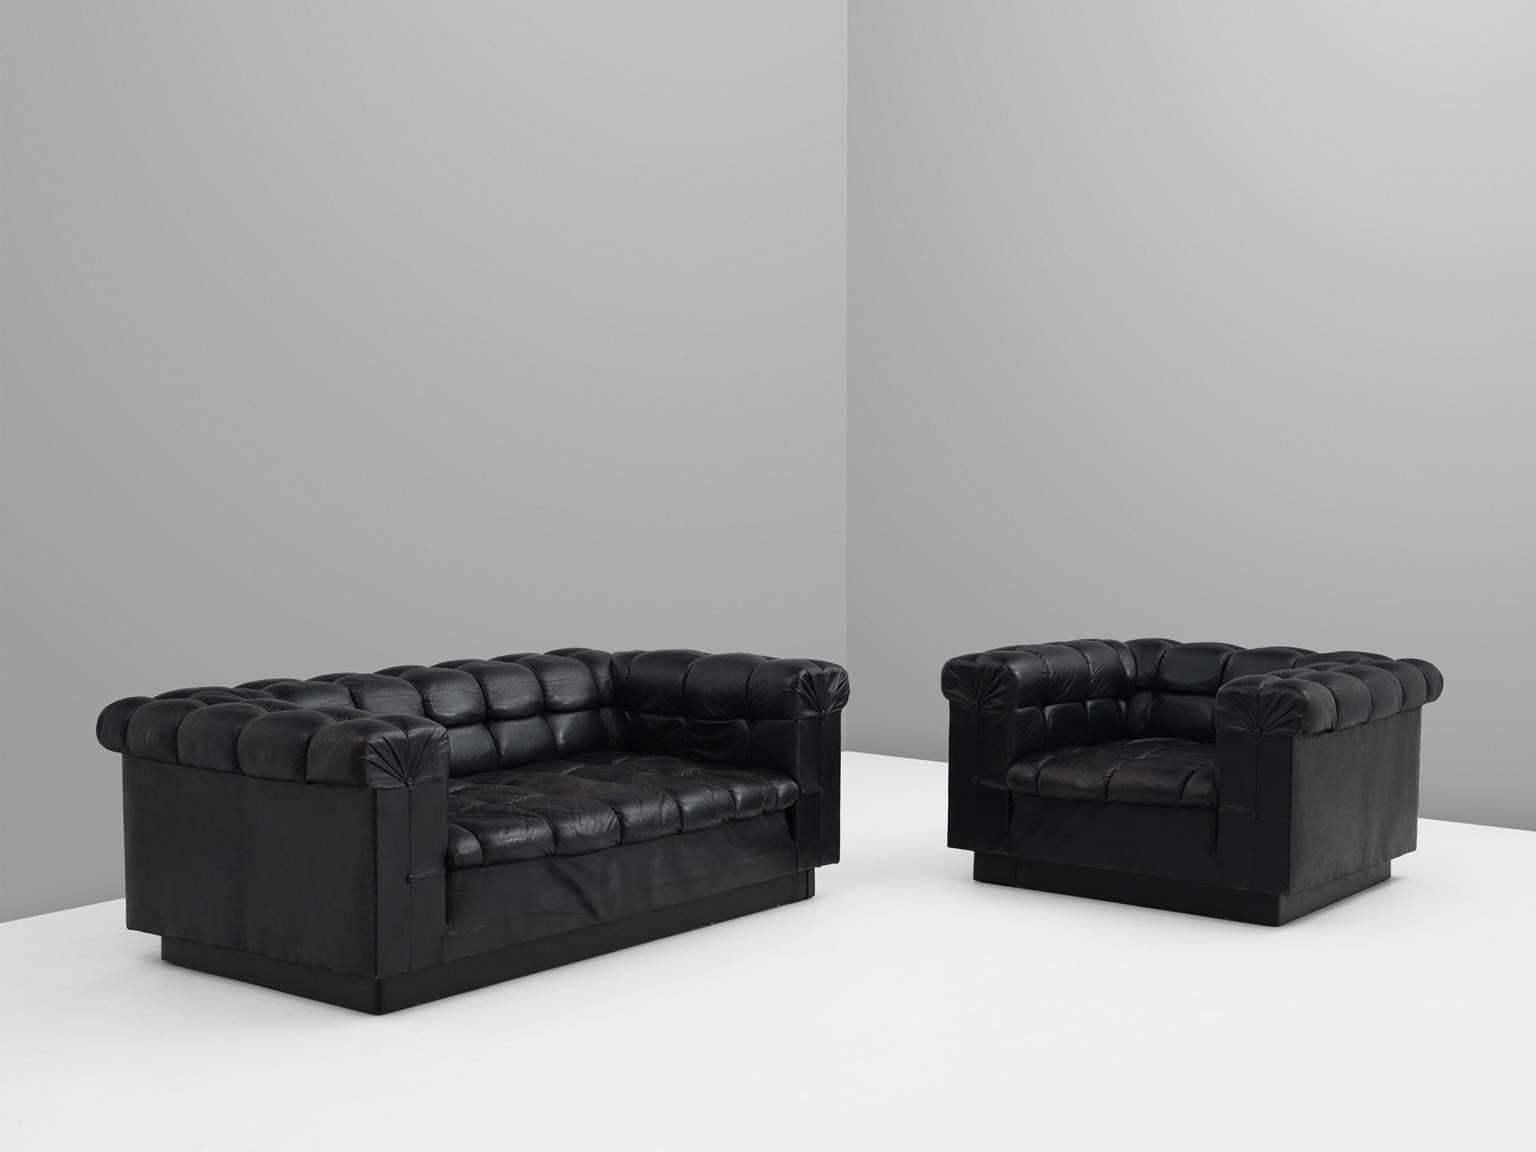 Edward Wormley Tufted Two-Seat Sofa in Black Leather for Dunbar 2